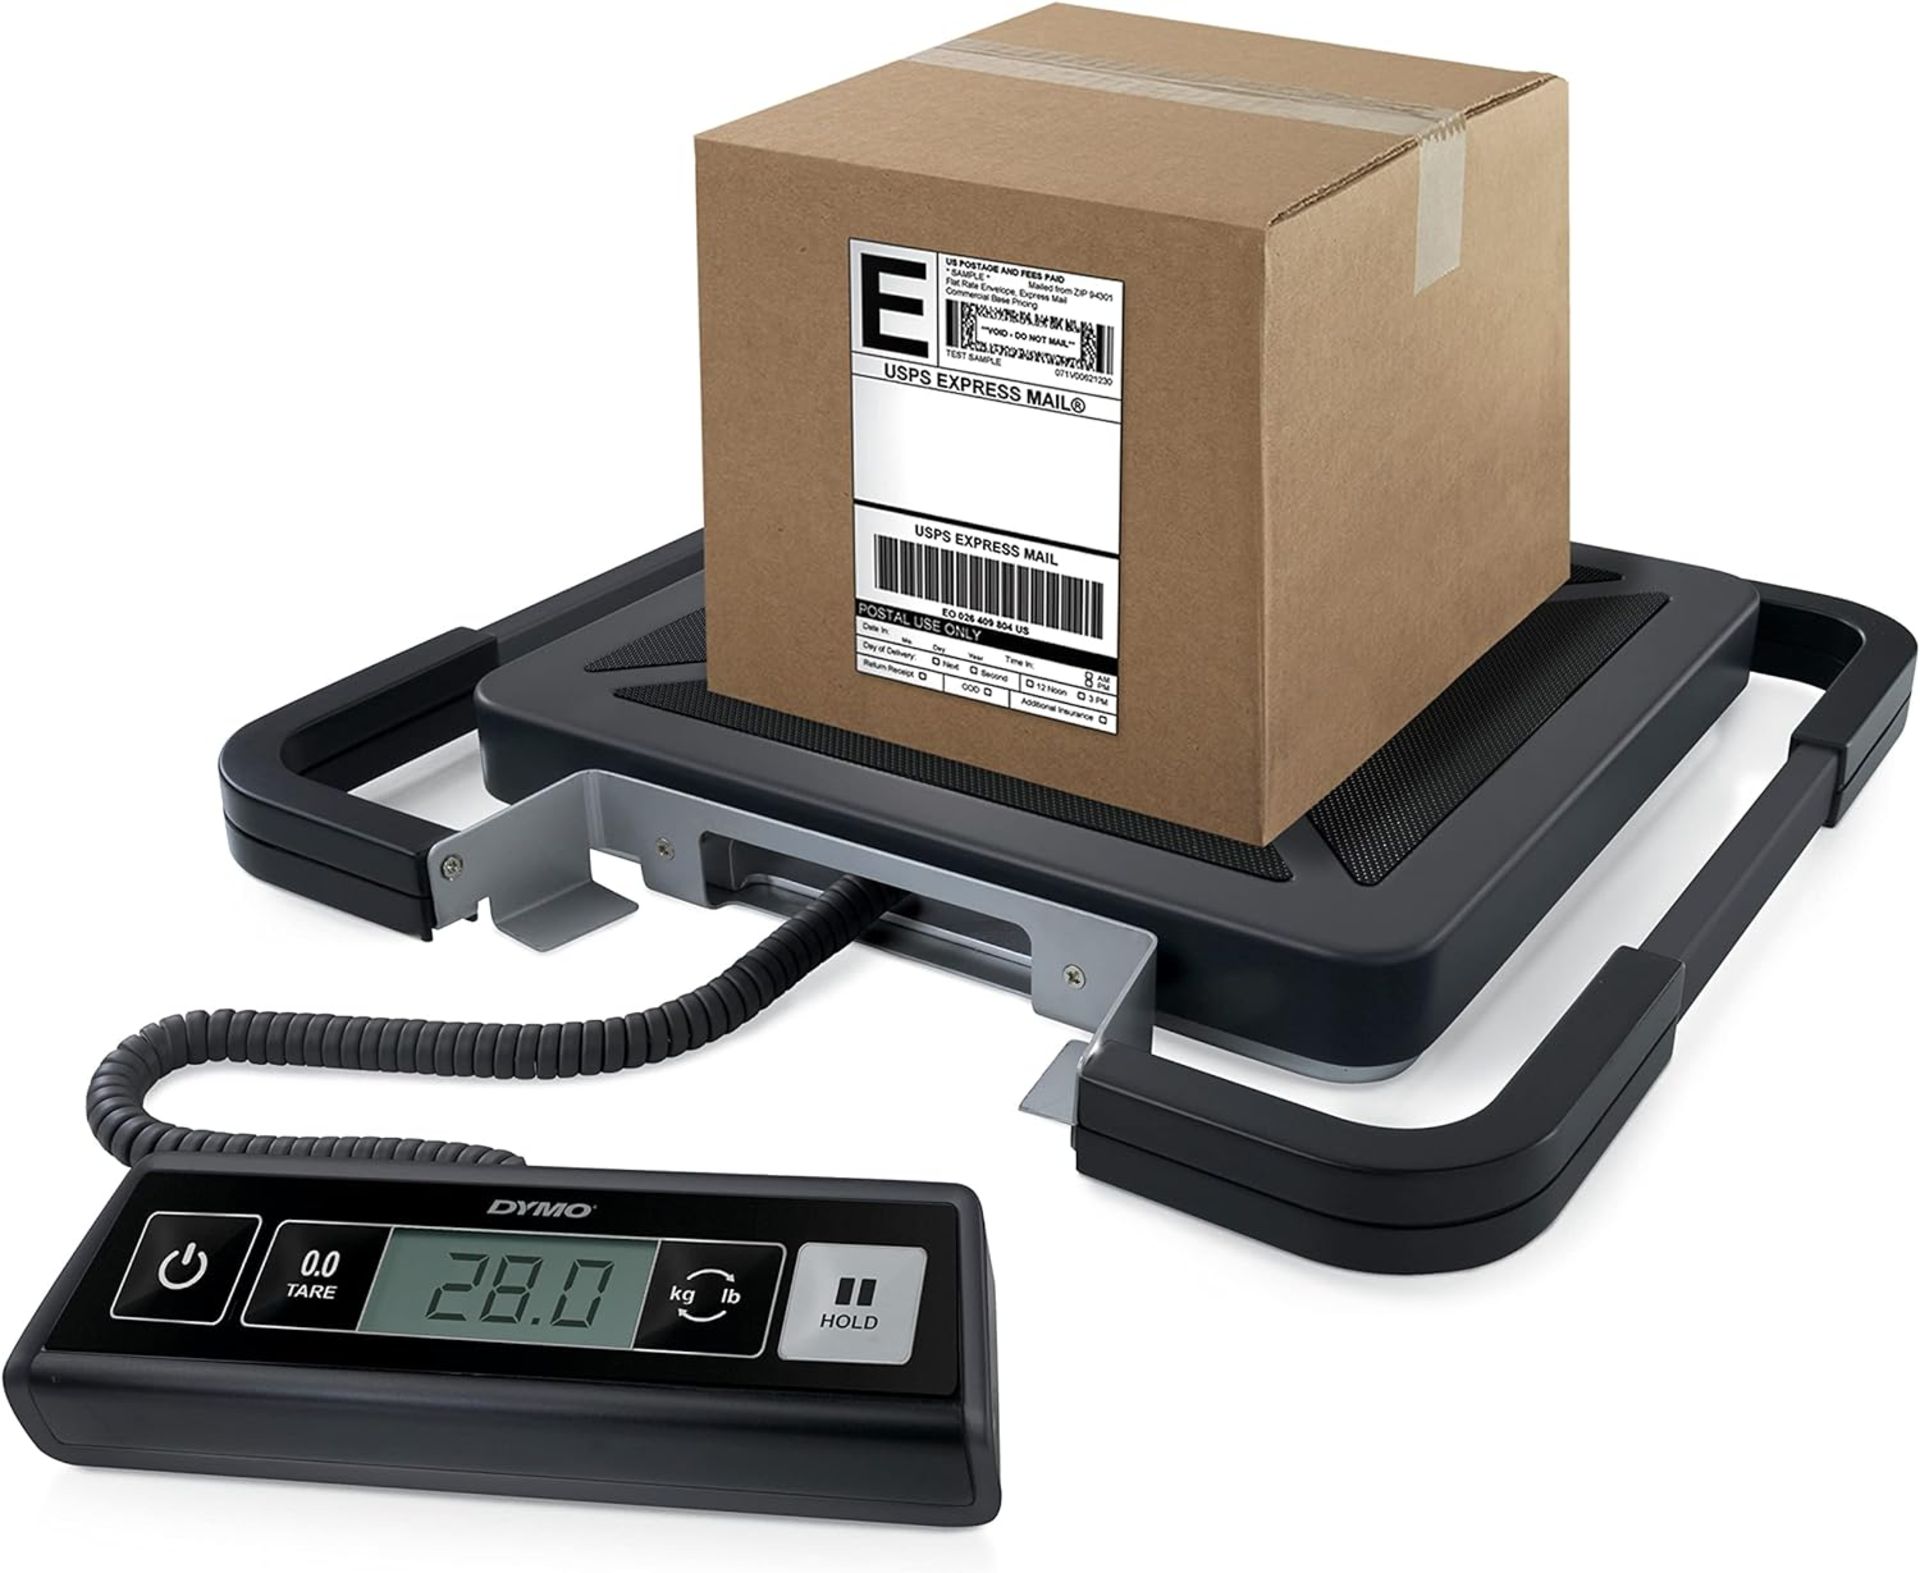 NEW & BOXED DYMO S100 Digital Shipping Scale. RRP £280. Rugged, heavy-duty, portable digital - Image 5 of 5